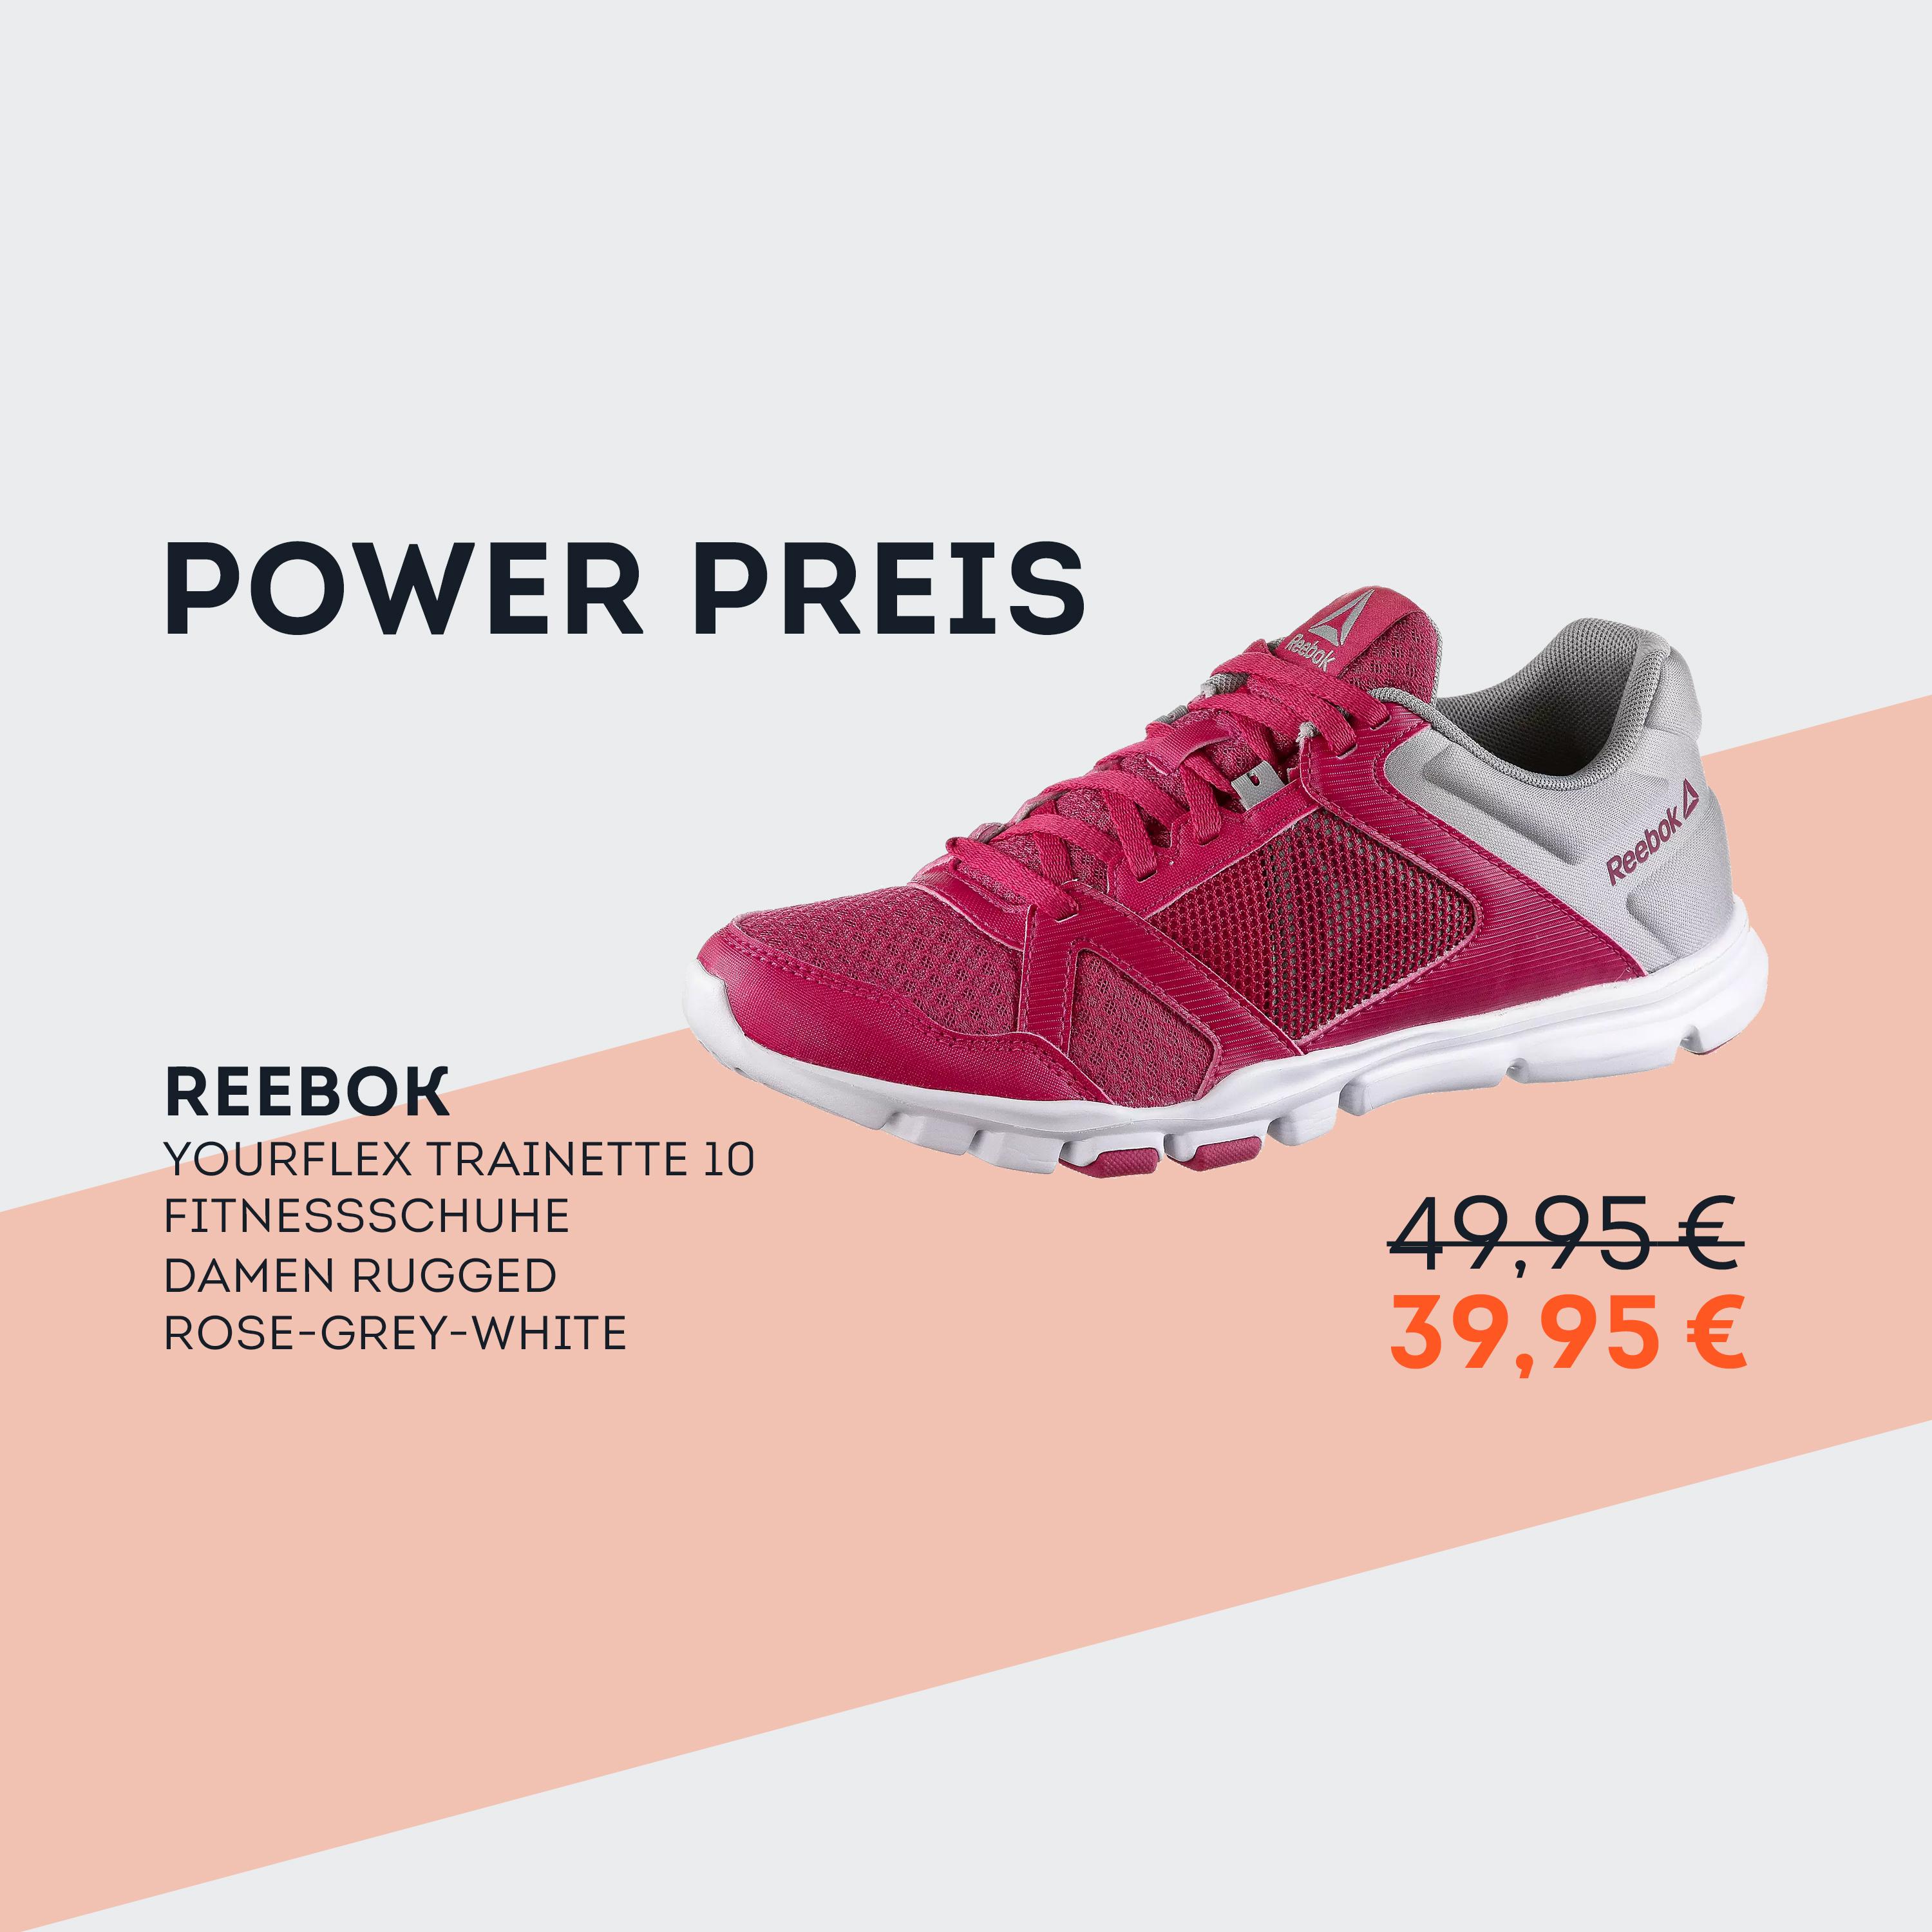 on fitnessschuhe factory outlet 78034 6634c